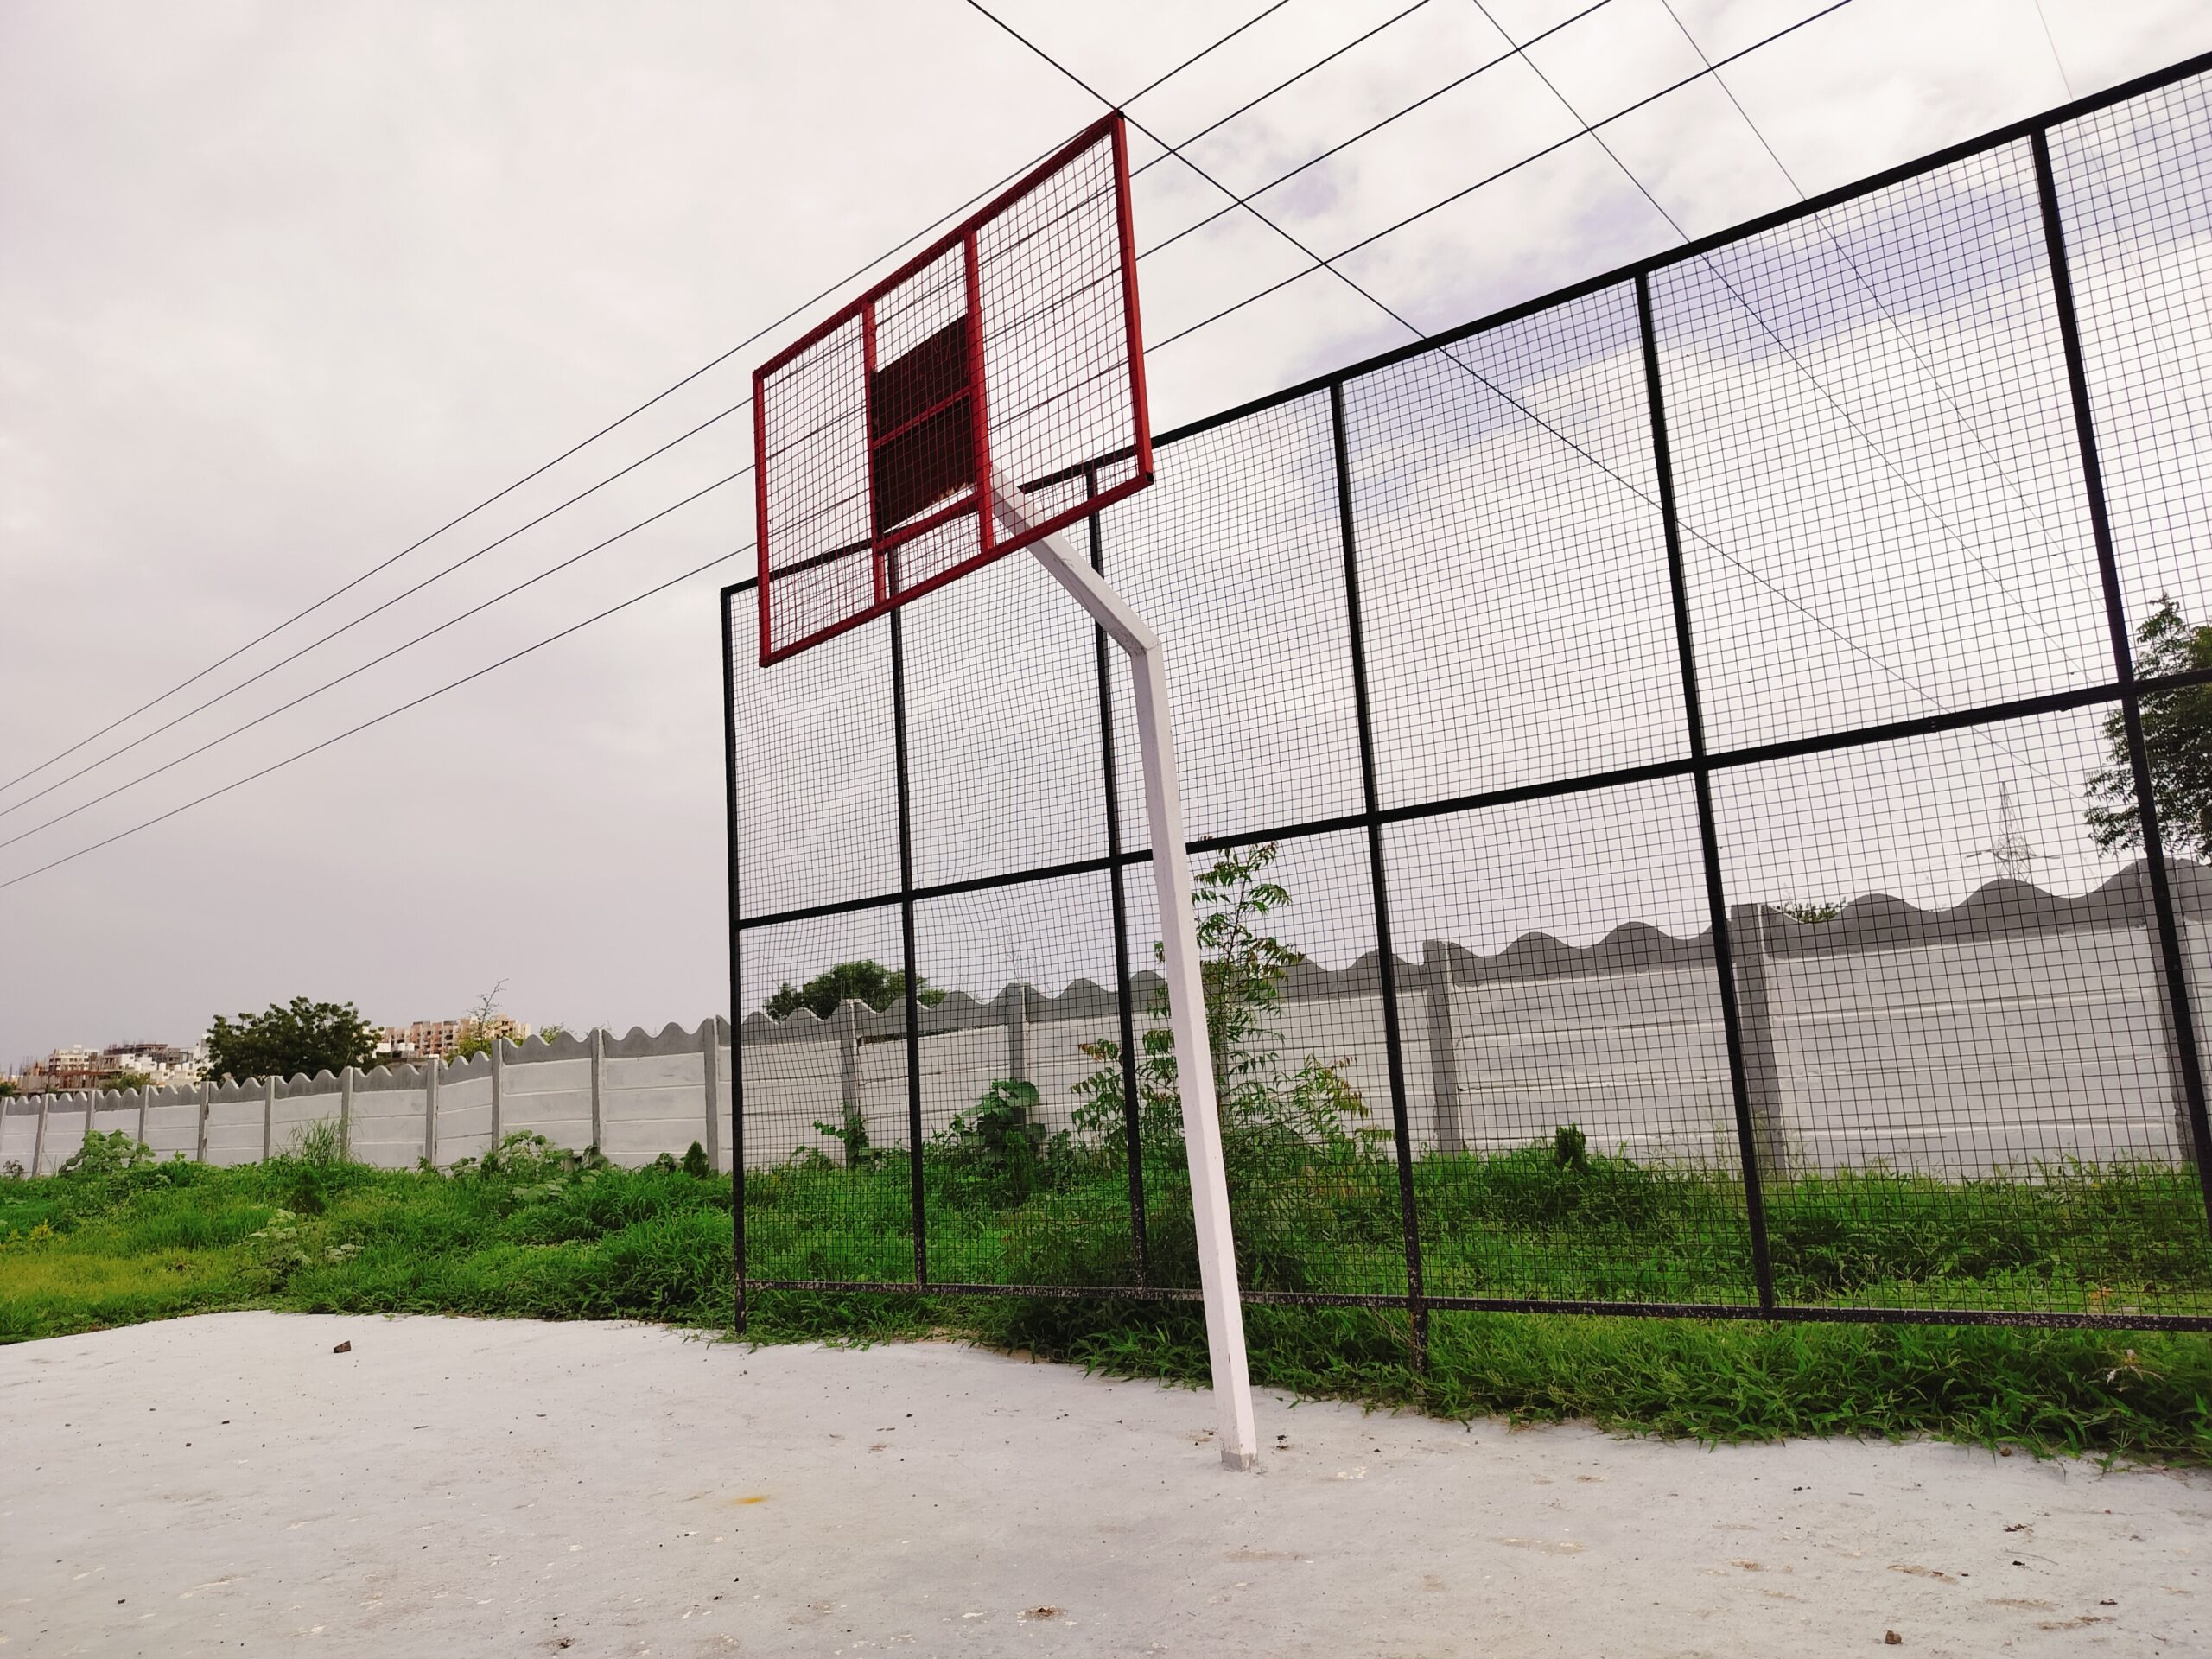 This image shows an open plot with a basketball court. The plot is located at Venkateshwara City in Vasant Vihar, Solapur, India. The basketball court is a great place for kids and adults to play basketball. The plot is also surrounded by trees and other vegetation, which provides shade and privacy. This image is a good representation of the kind of amenities that are available at Venkateshwara City.